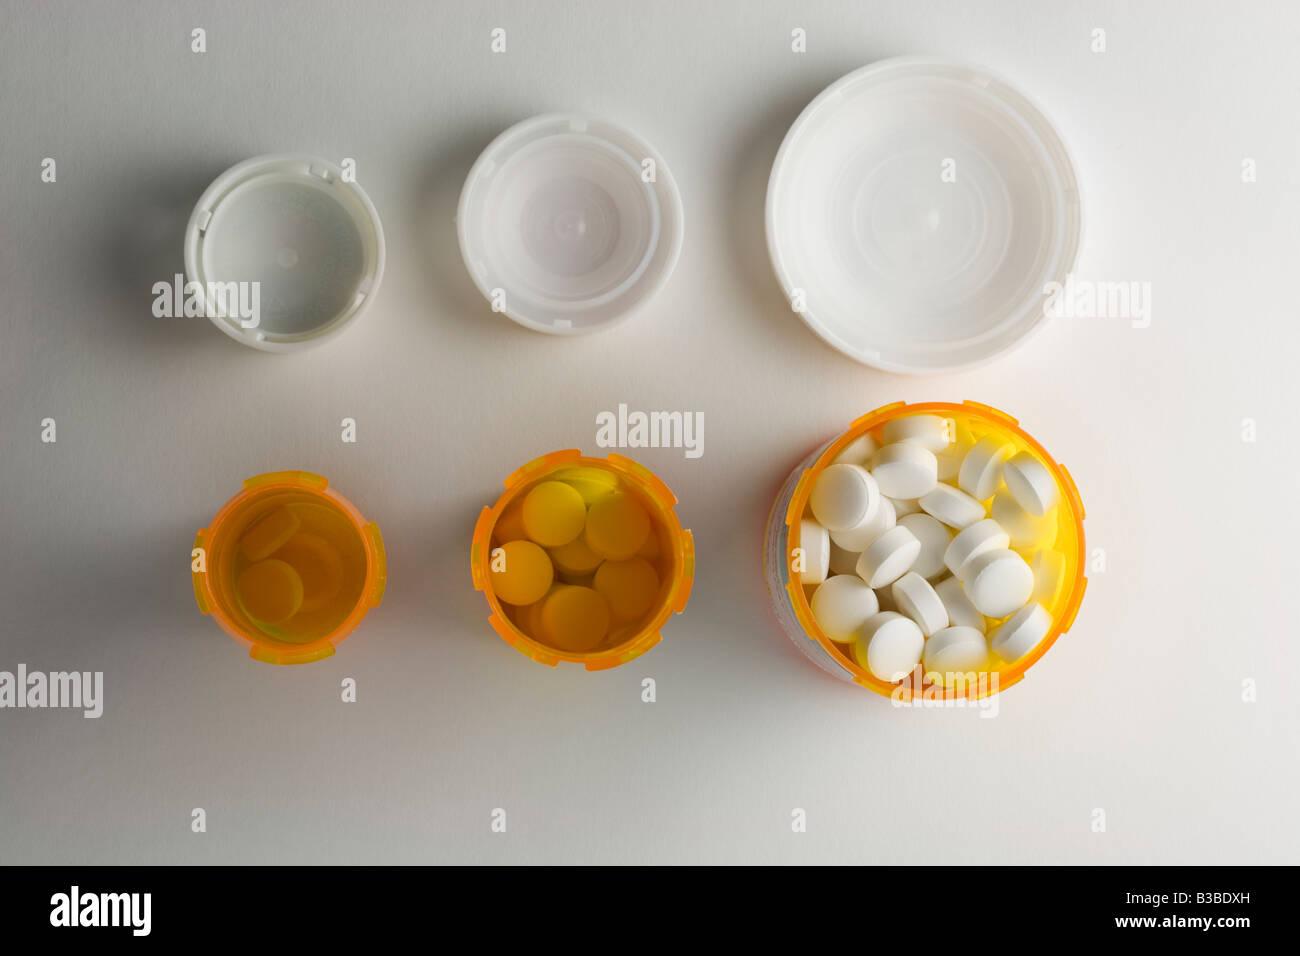 Bottles of tablets increasing in size Stock Photo